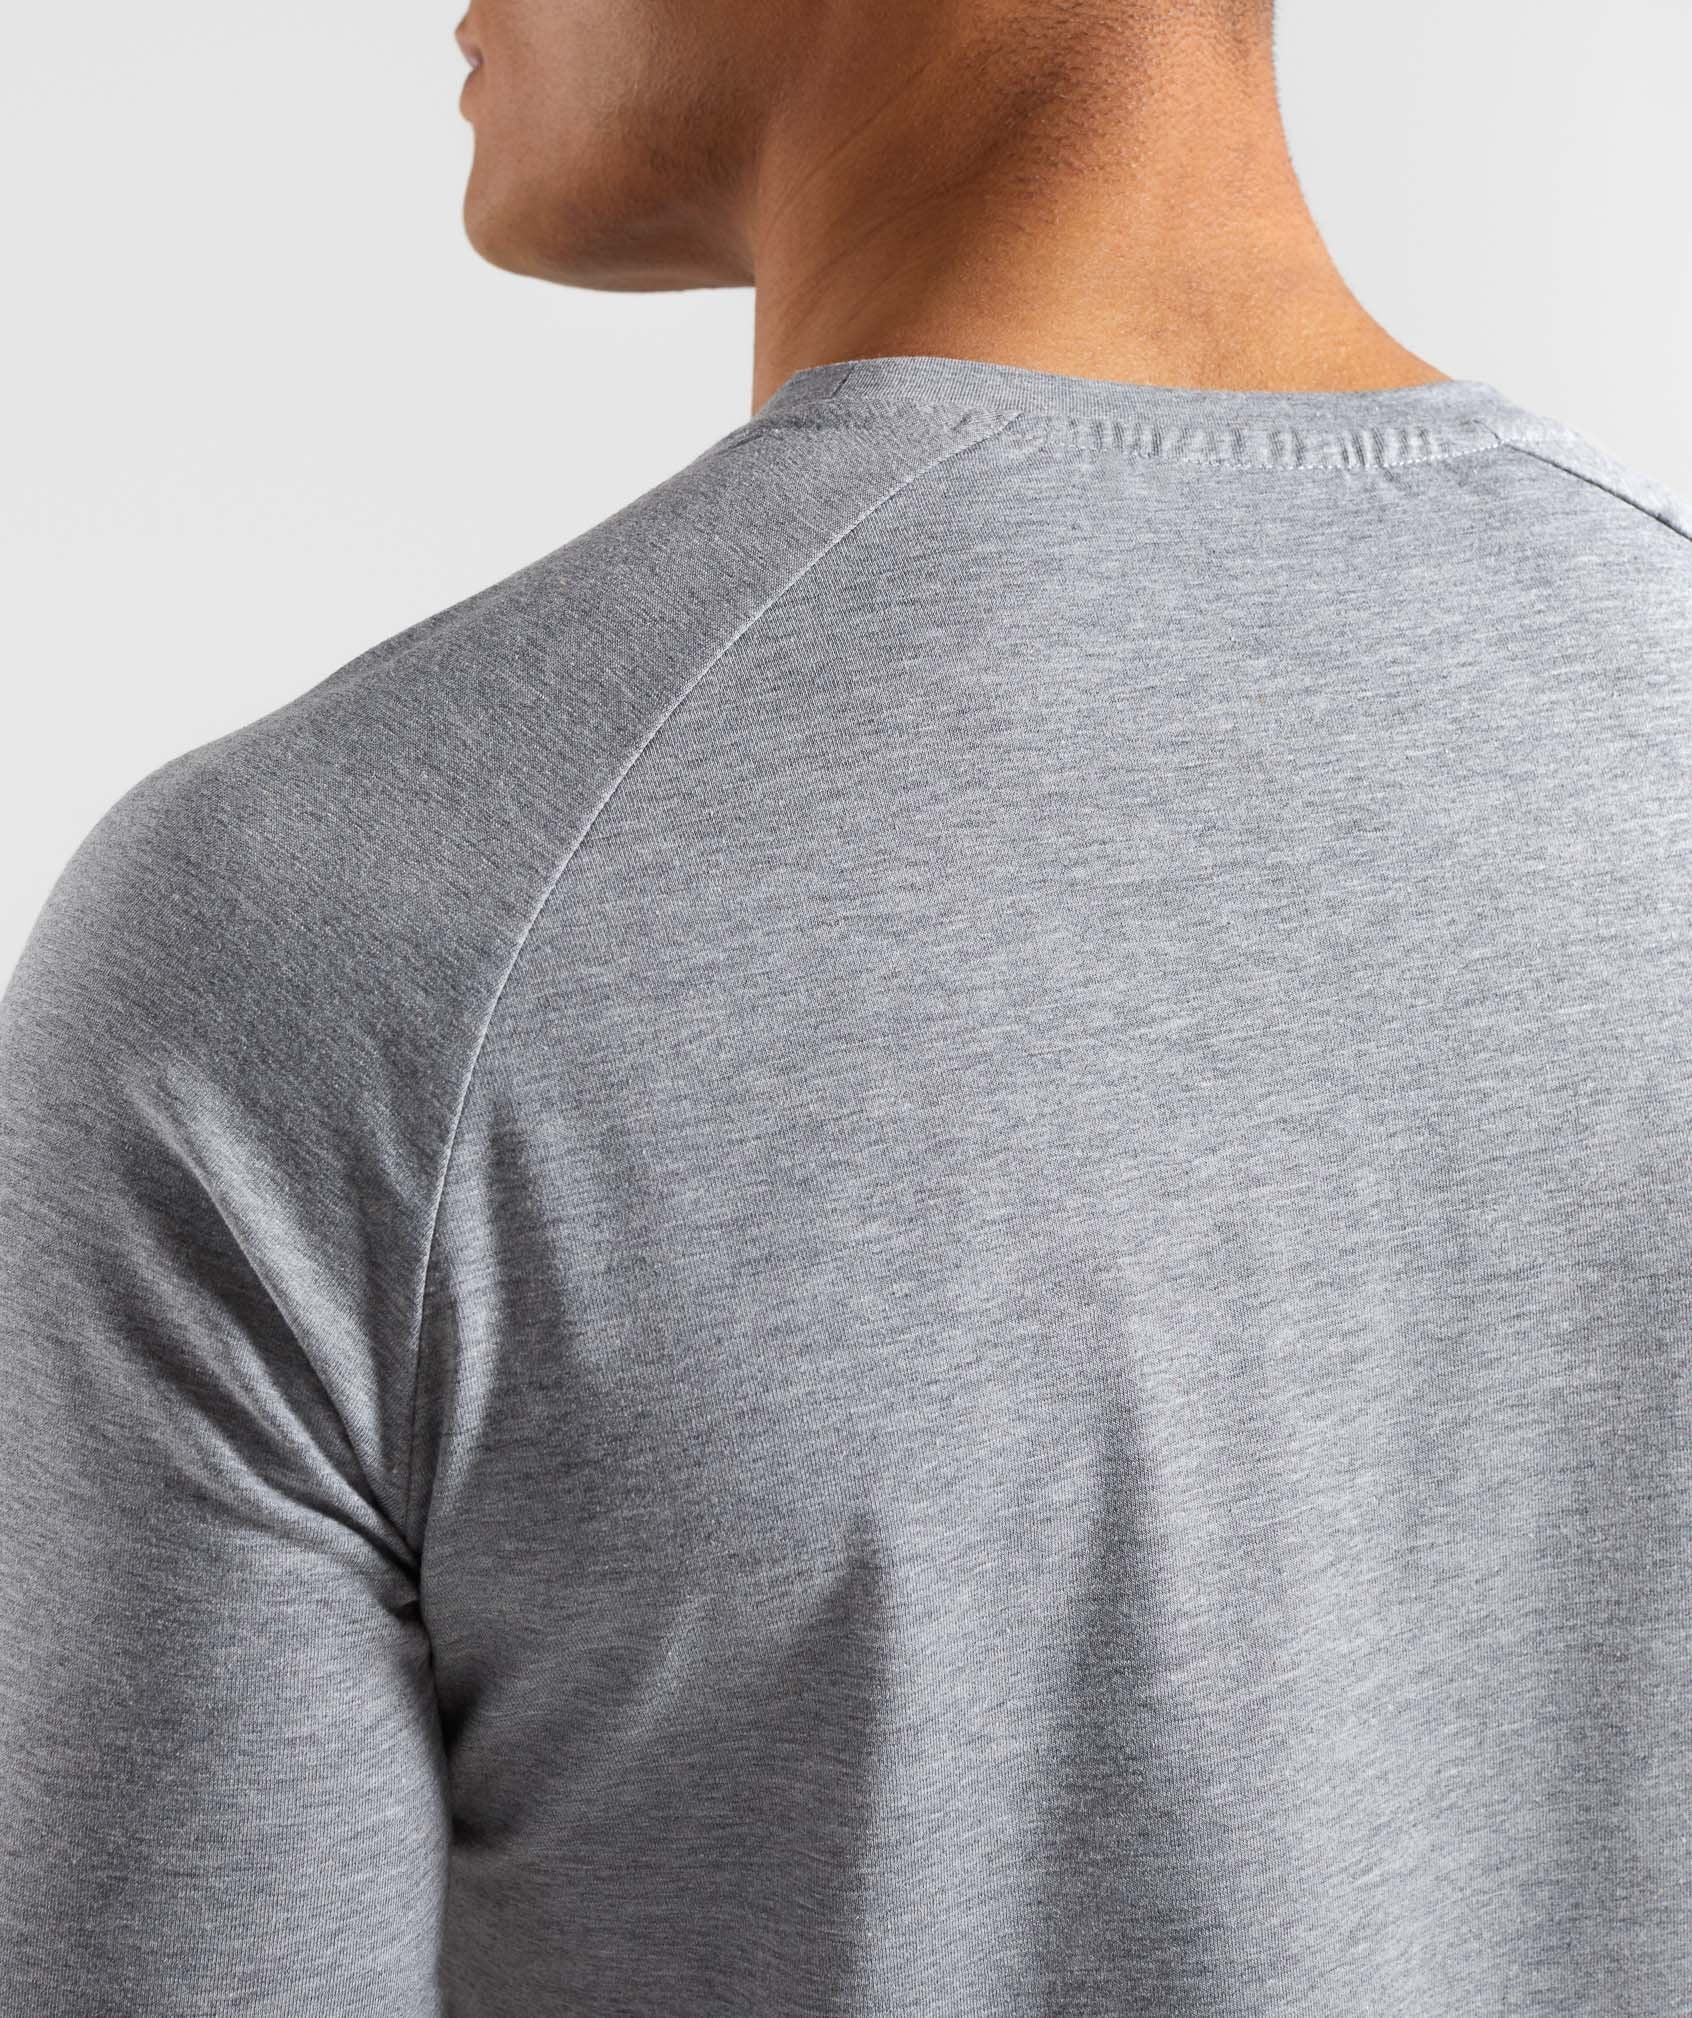 Apollo Long Sleeve T-Shirt in Grey - view 6